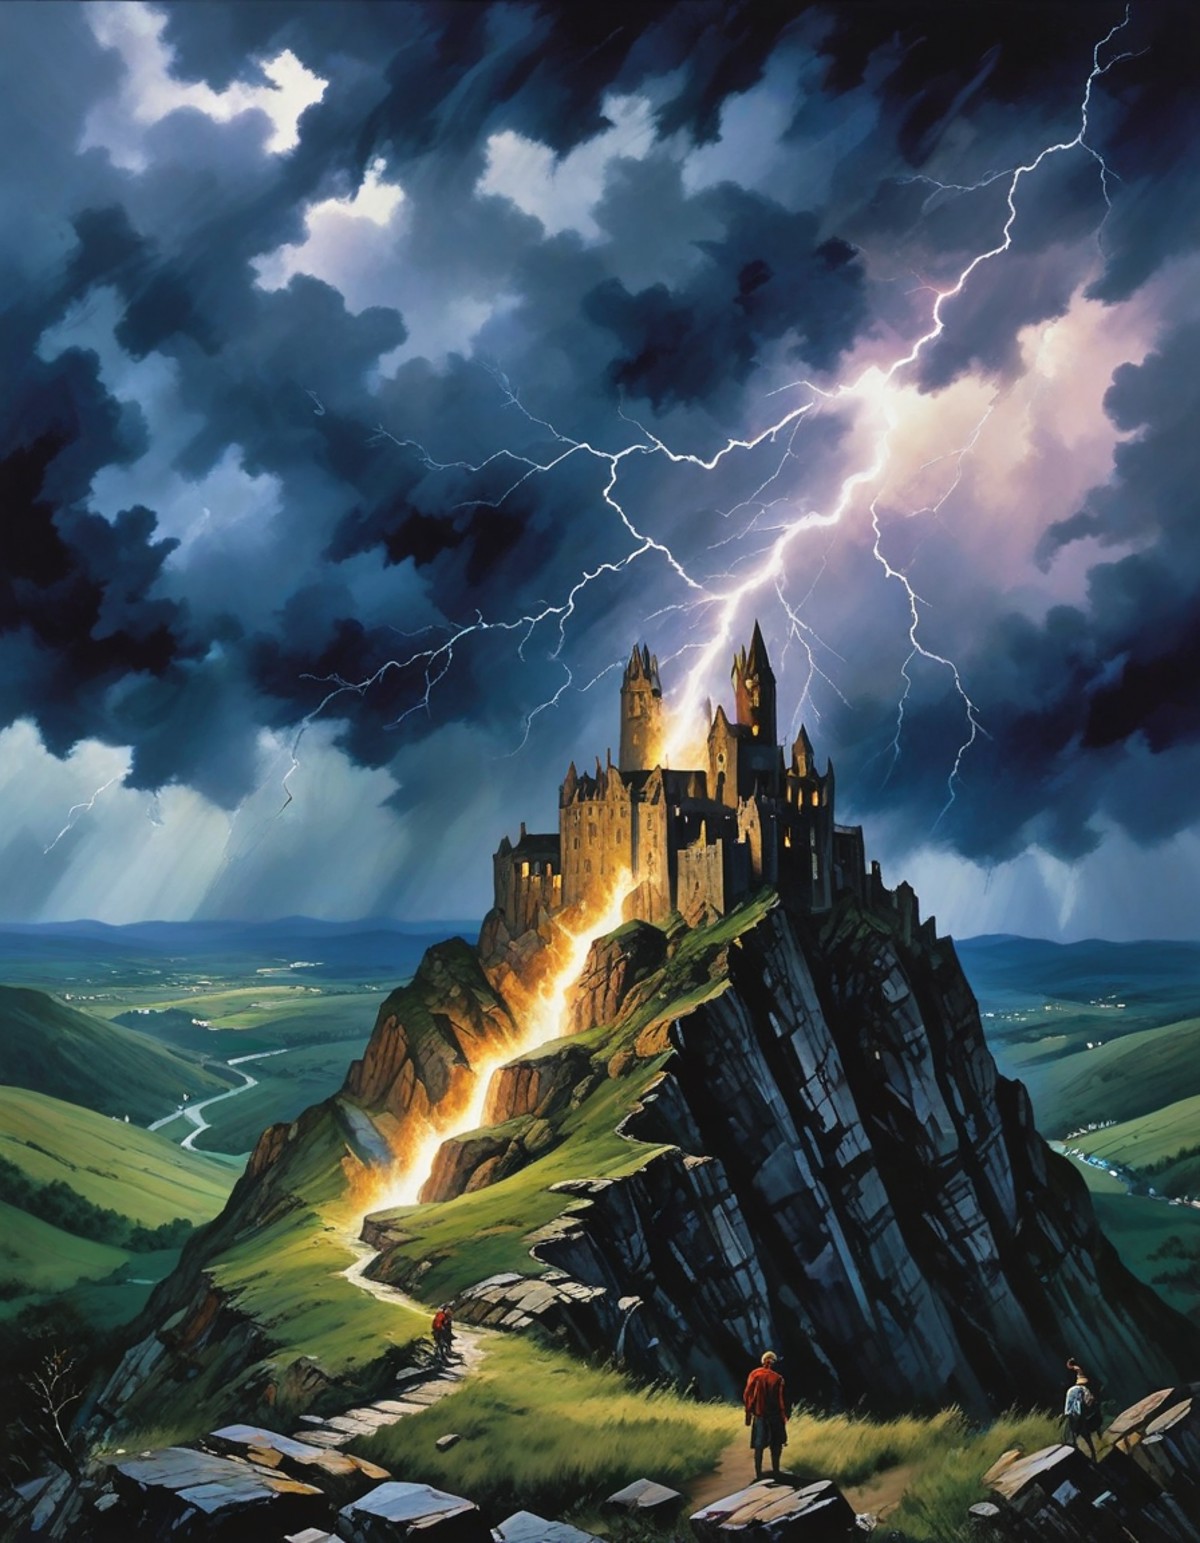 (lightning storm), Mountain cliffhanger, Grit and will against nature, Perilous ascent, by artist JK Rowling